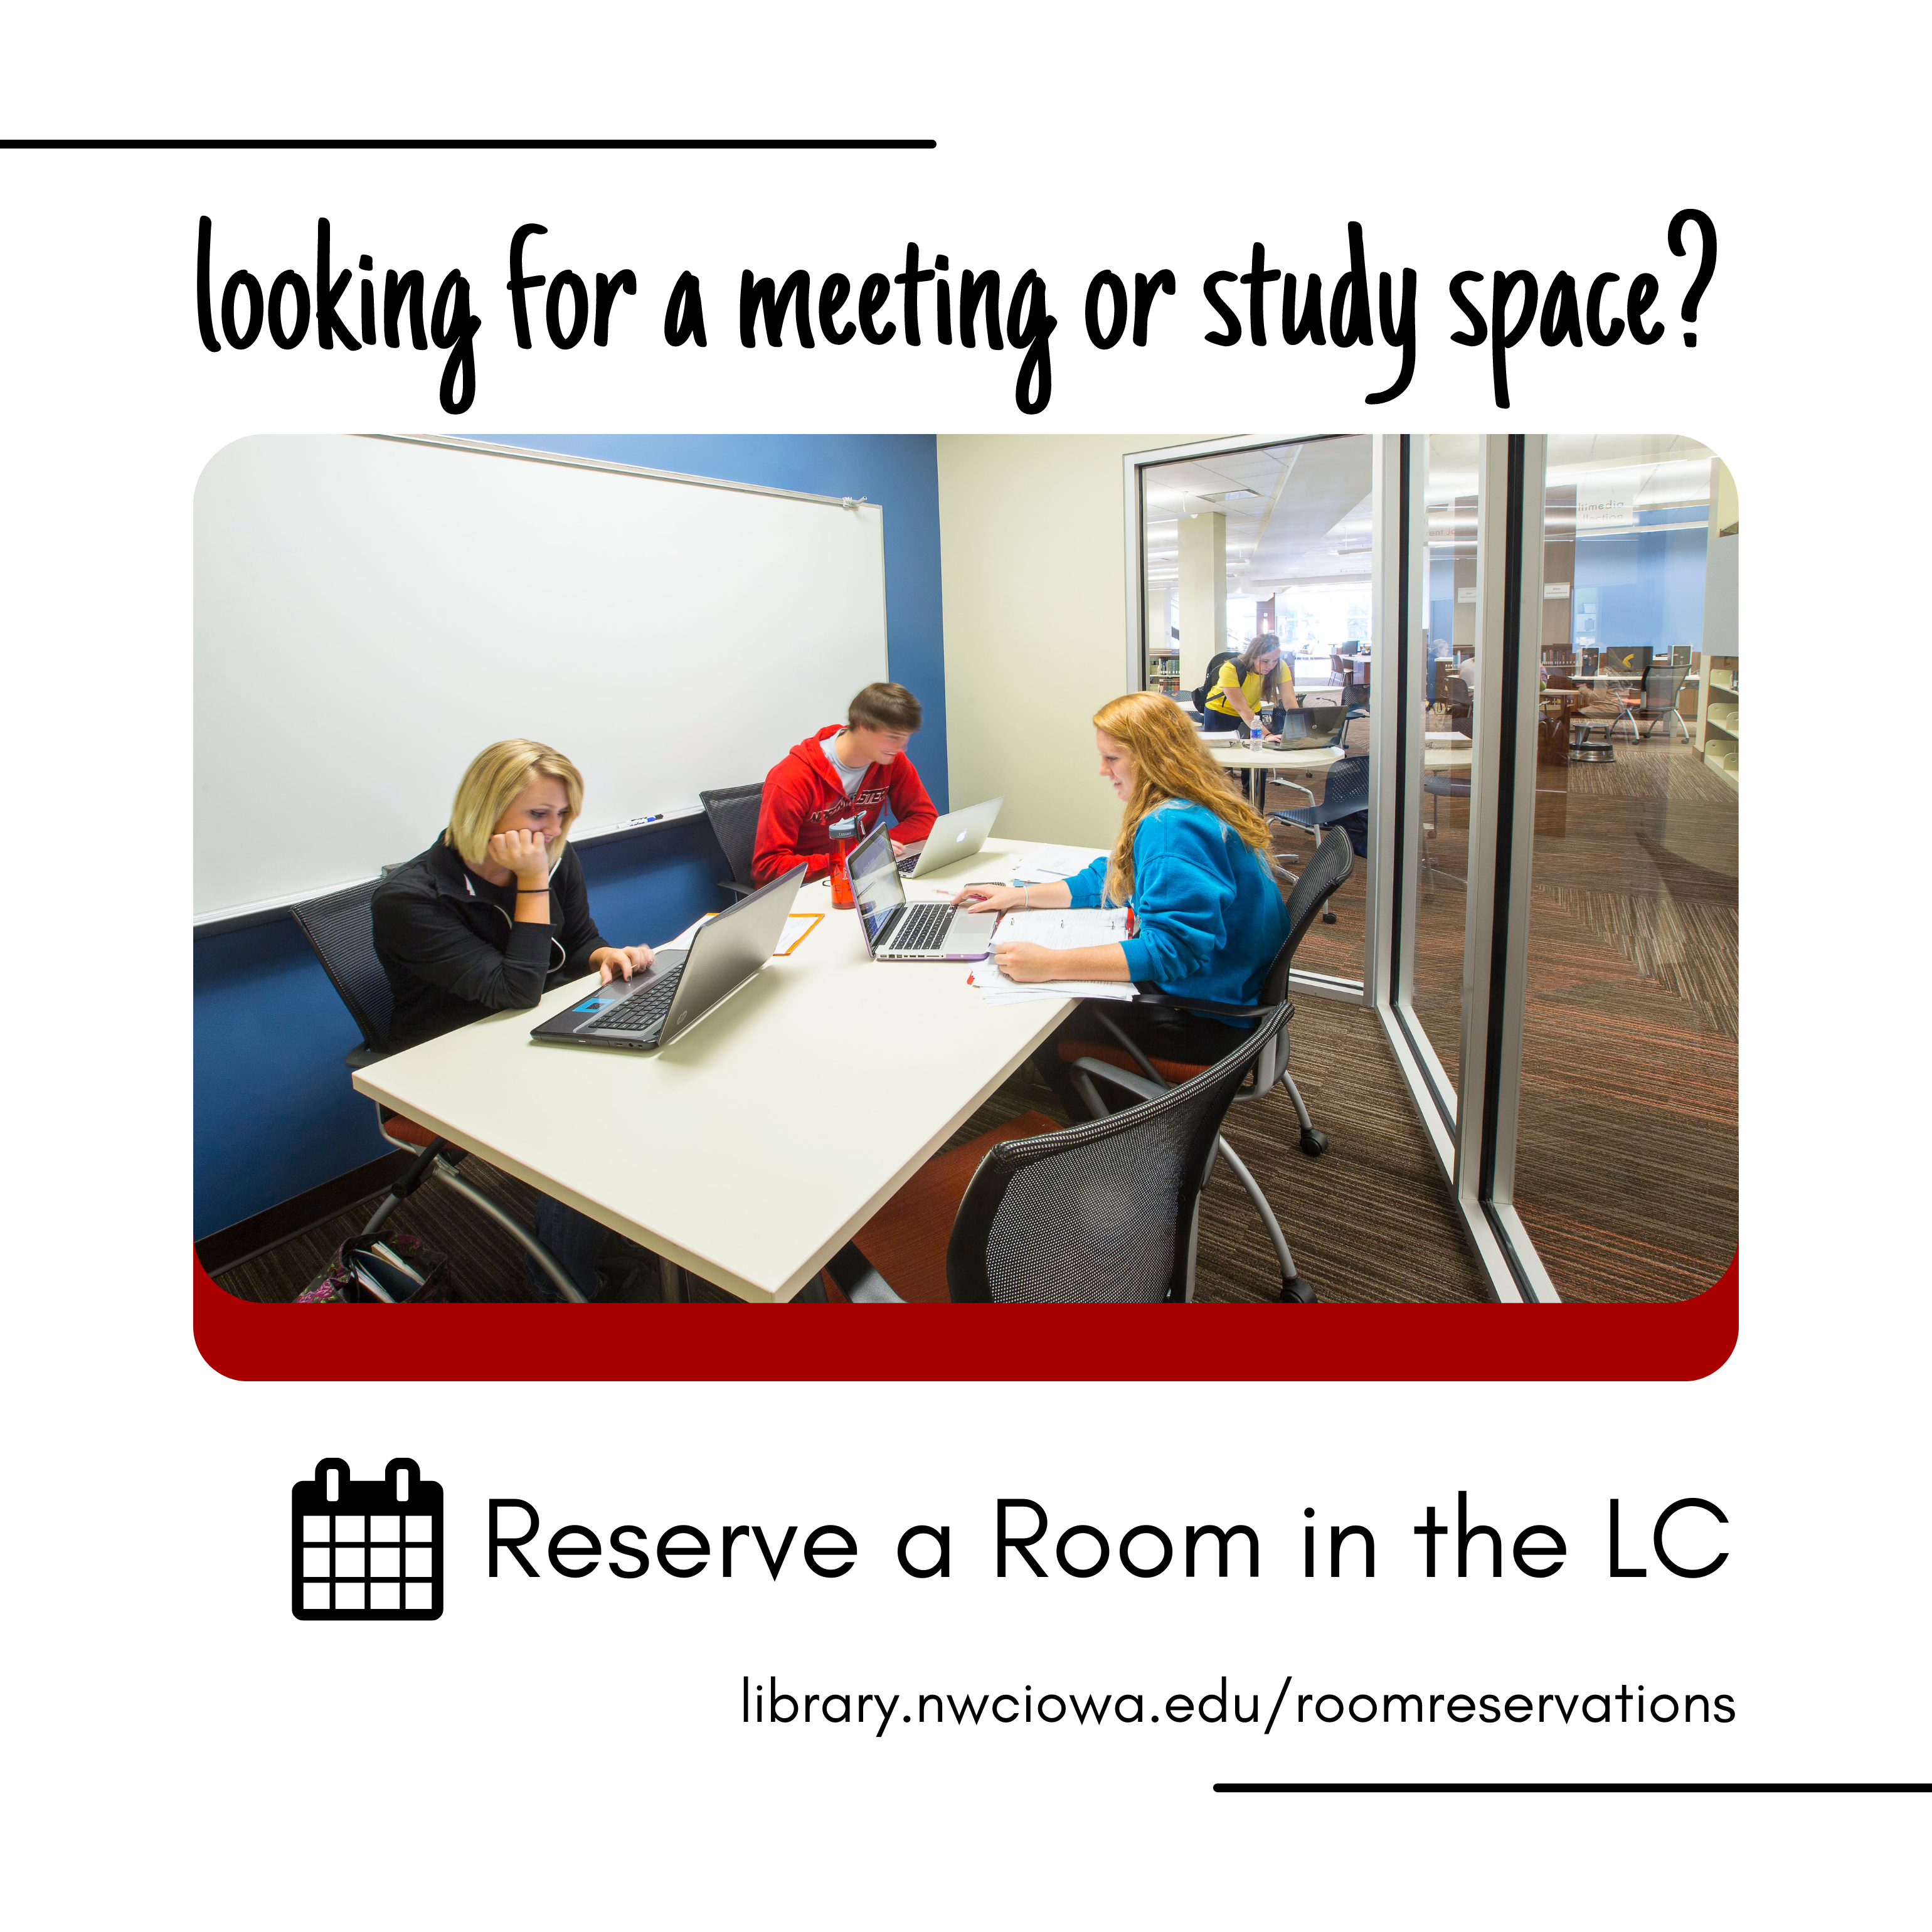 looking for a meeting or study space? Reserve a Room in the LC: library.nwciowa.edu/roomreservations